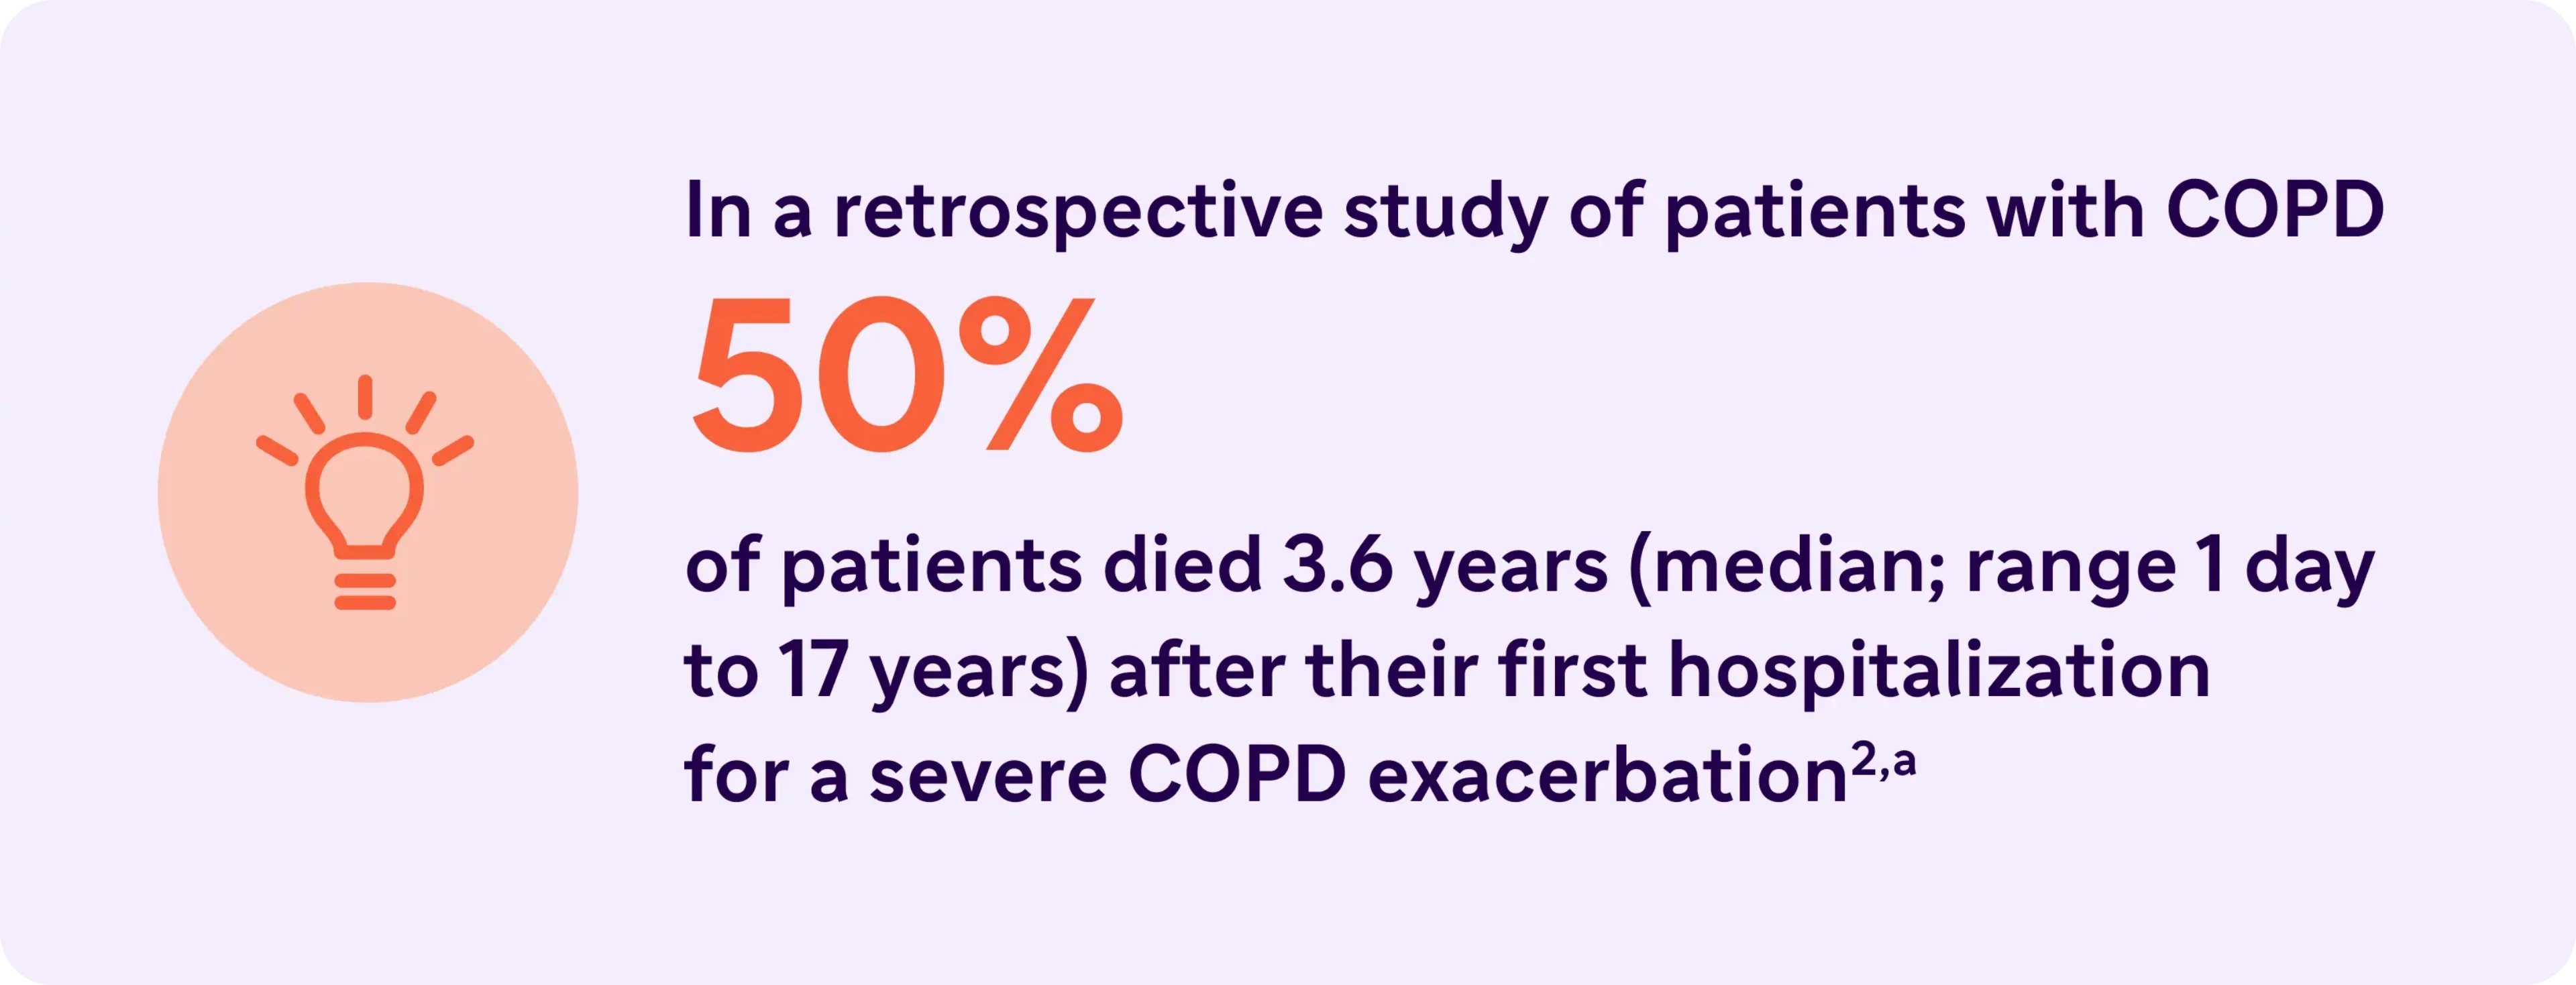 According to a study, 50% of patients died 3.6 years after their first hospitalization for a severe COPD exacerbation